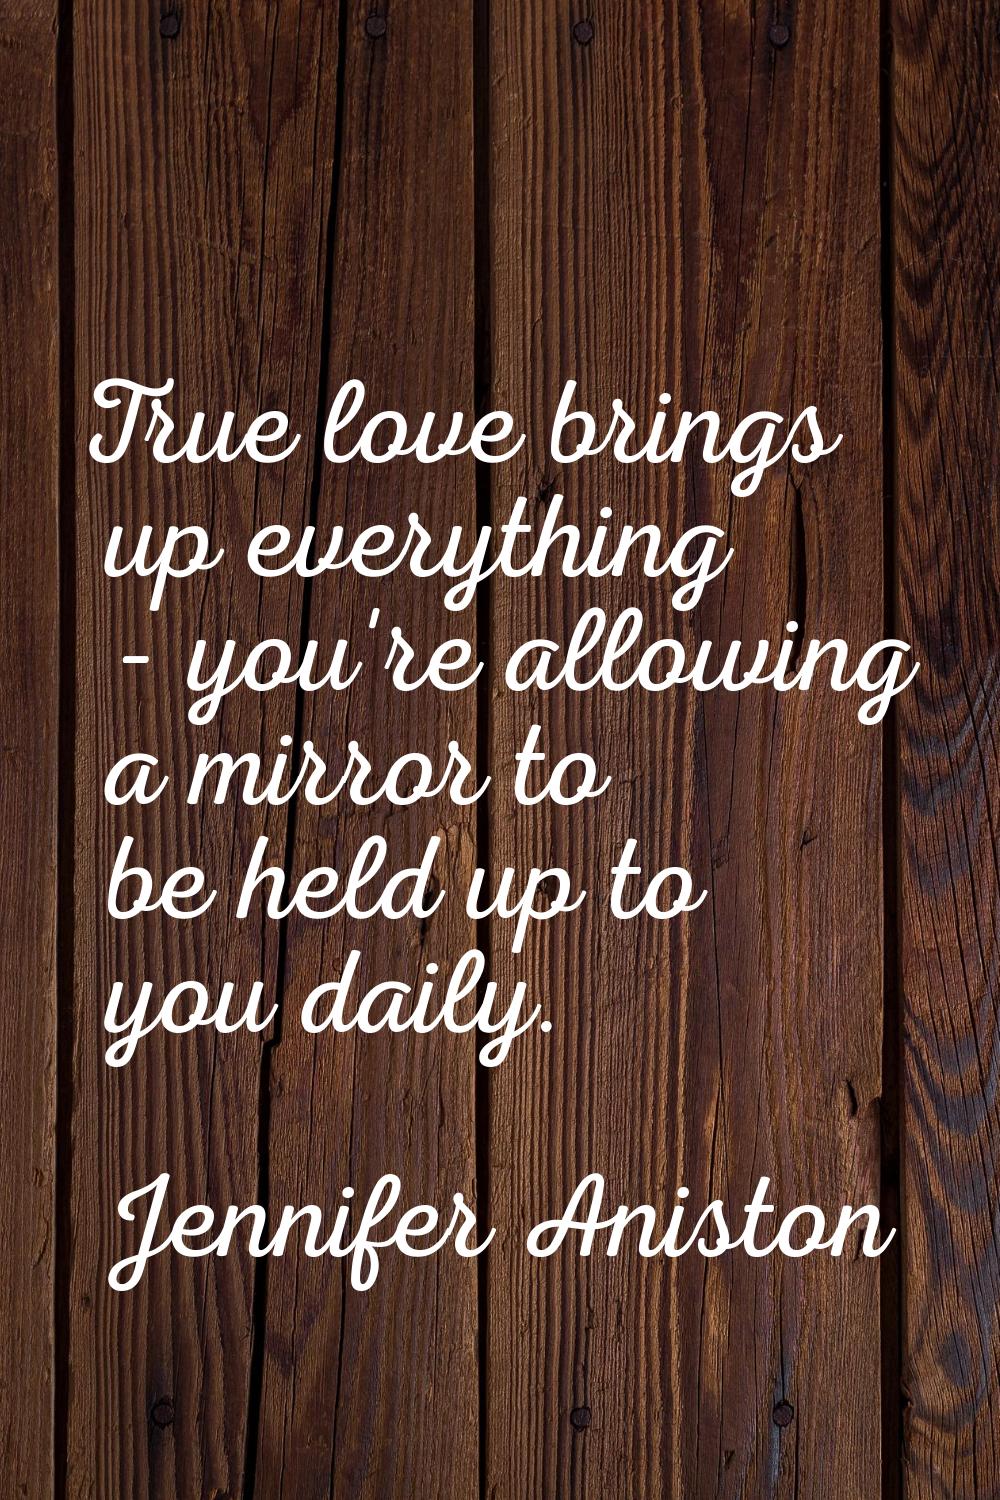 True love brings up everything - you're allowing a mirror to be held up to you daily.